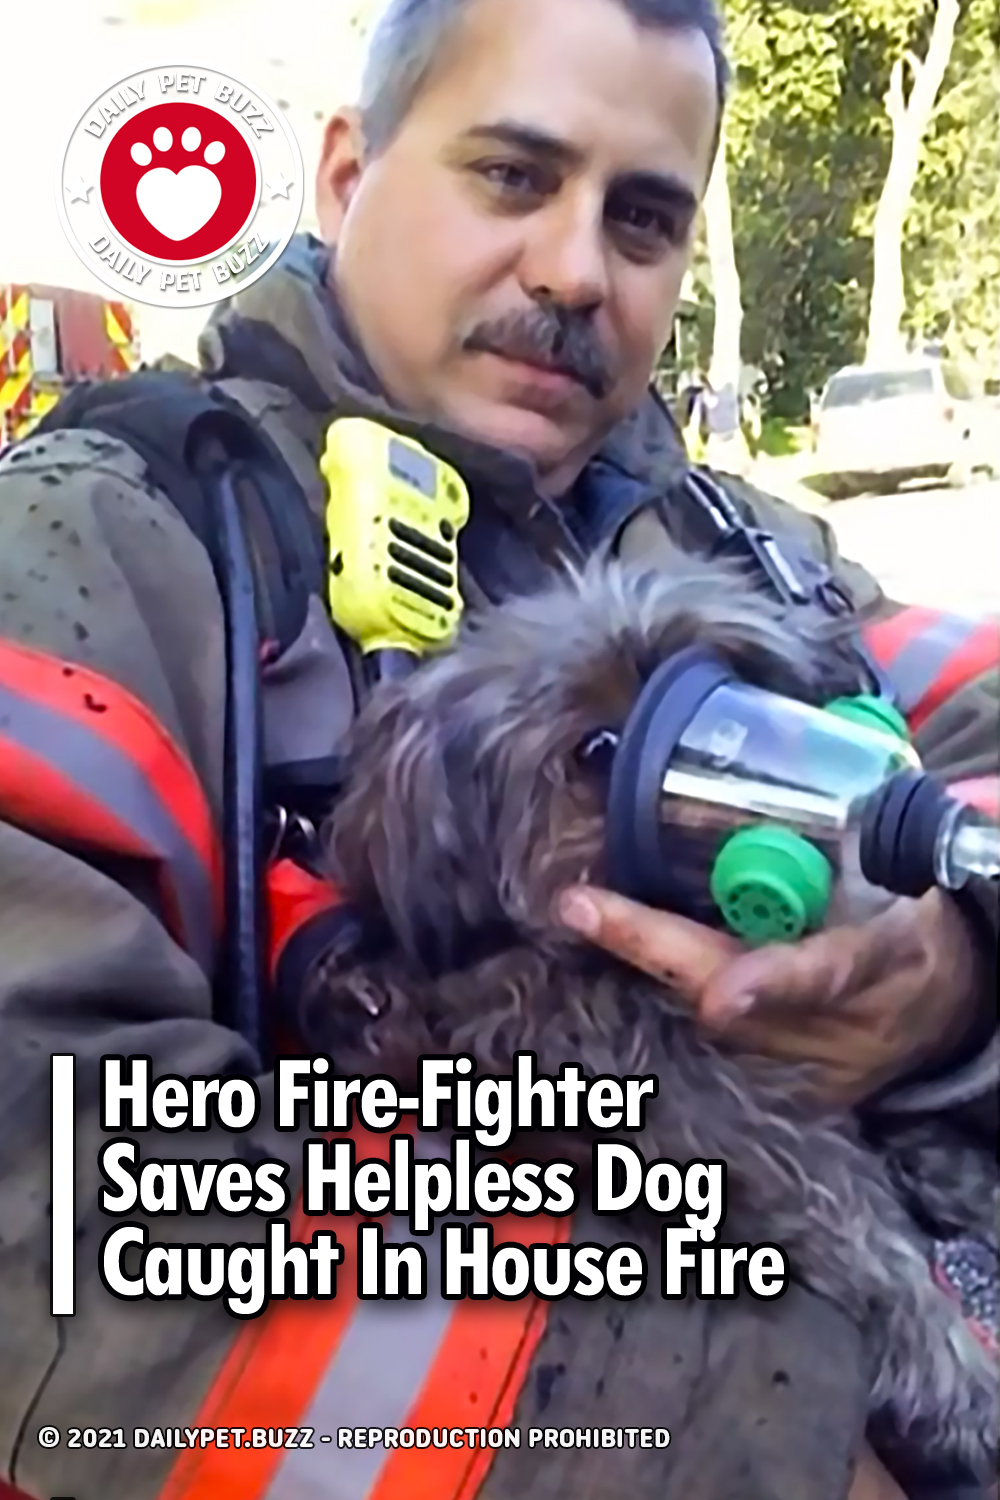 Hero Fire-Fighter Saves Helpless Dog Caught In House Fire